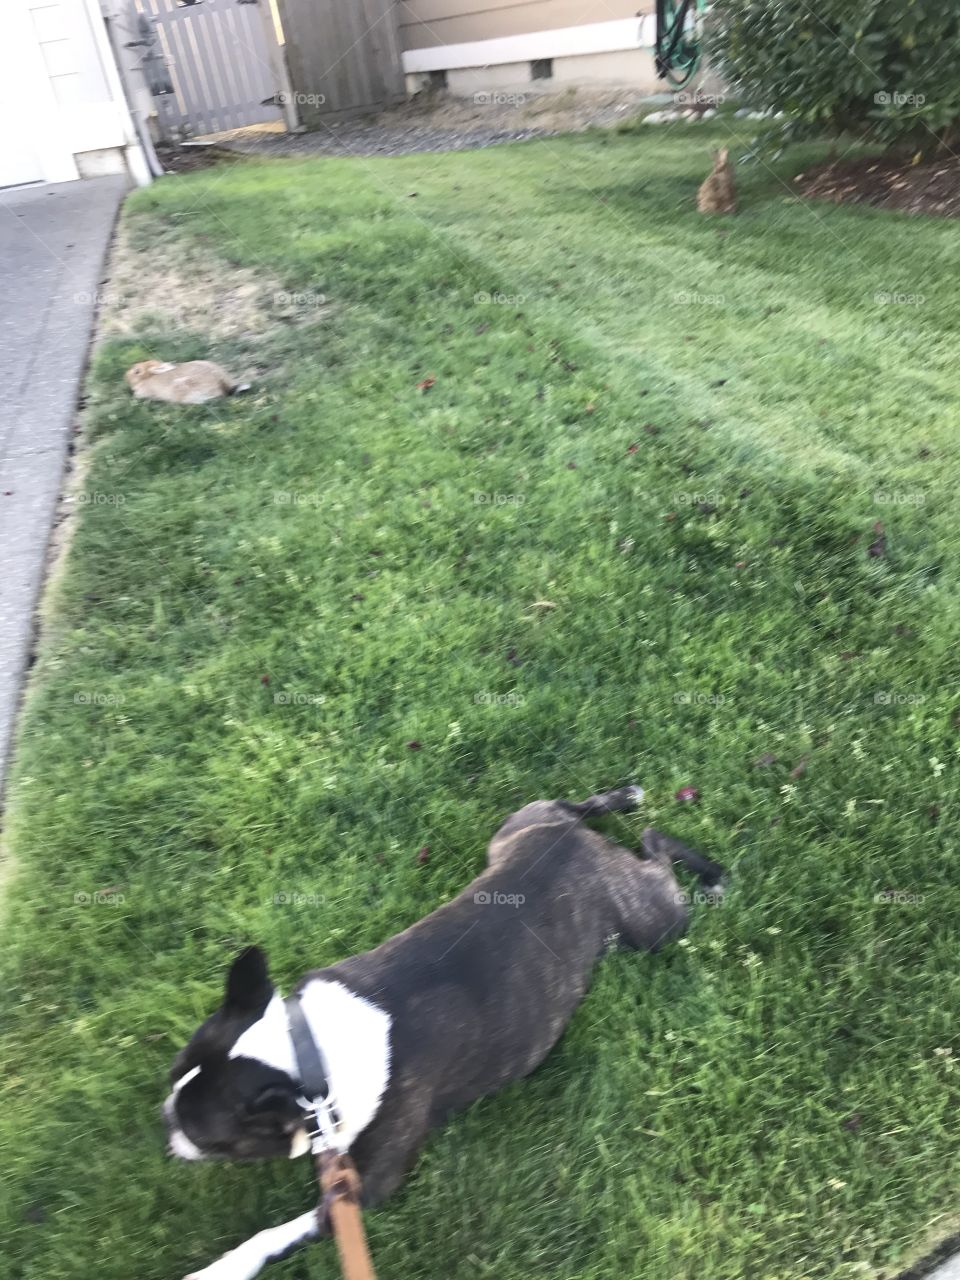 Adorable Boston terrier resting in a grassy area near two small brown bunny rabbits